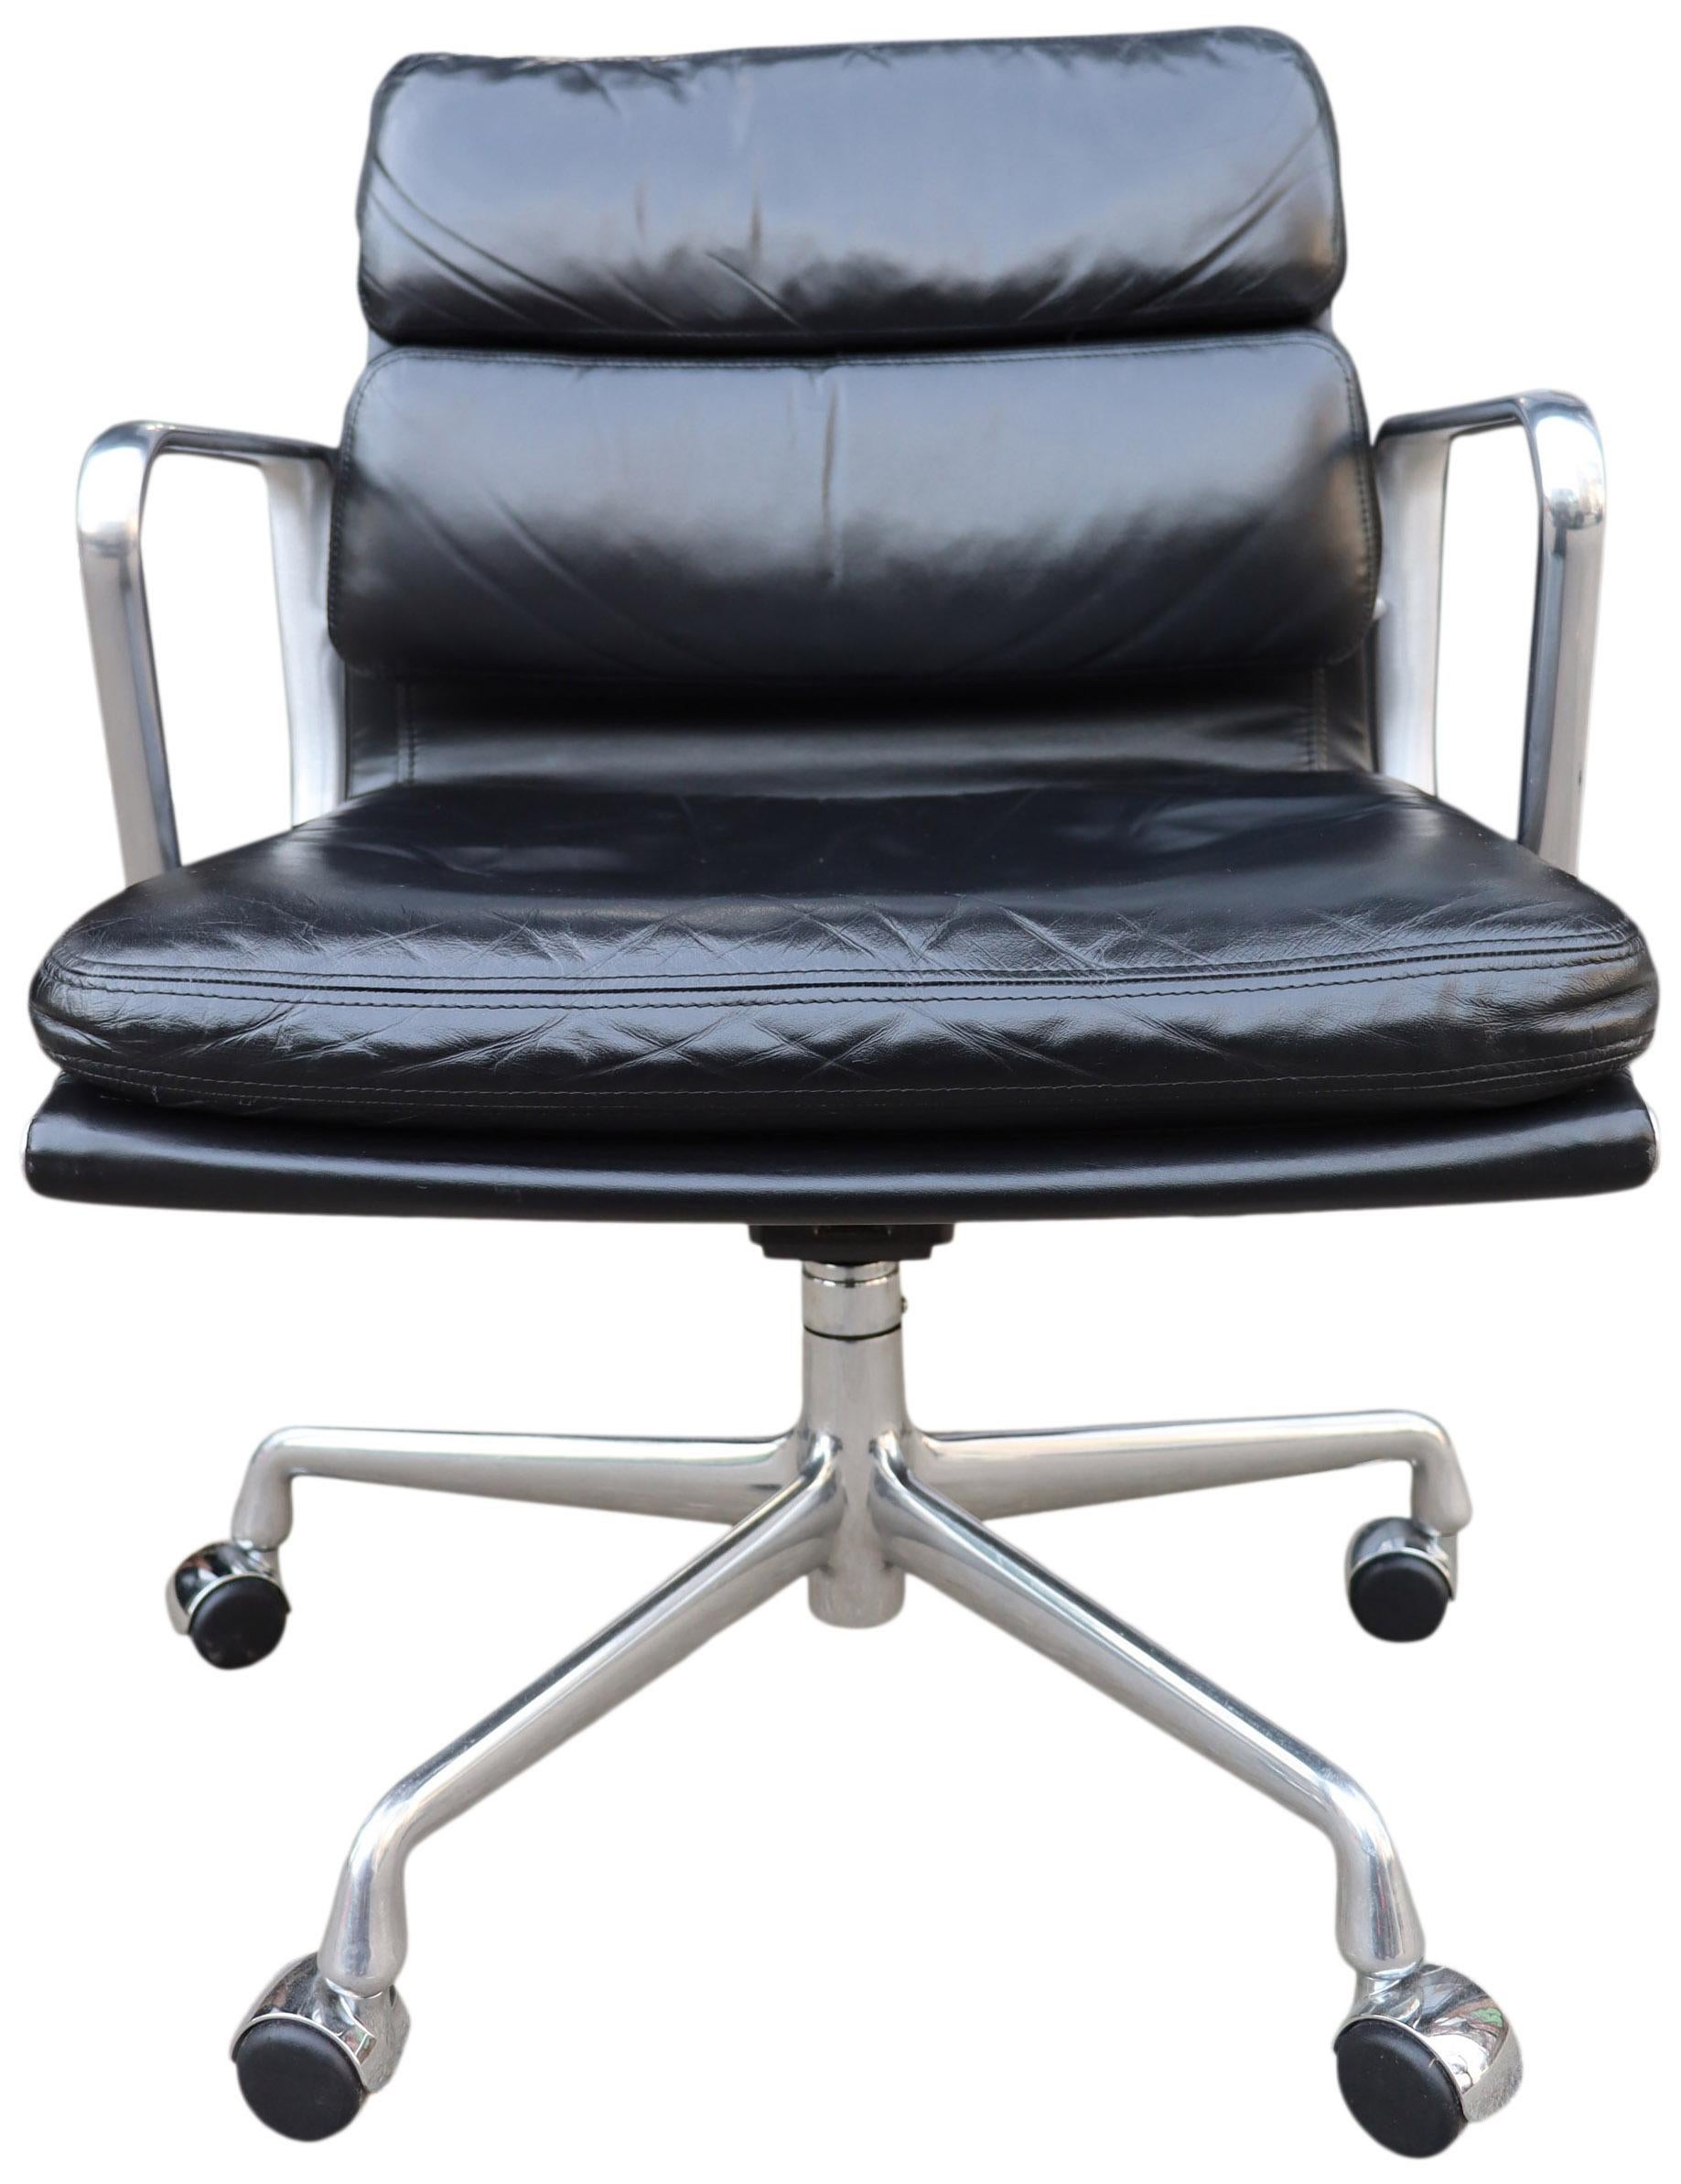 For your consideration we have up to 50 Eames for Herman Miller soft pad chairs in black leather with low backs. Manual height and tilt with 5 star base

These authentic vintage examples are icons of Mid-Century Modern design. The chairs part of the